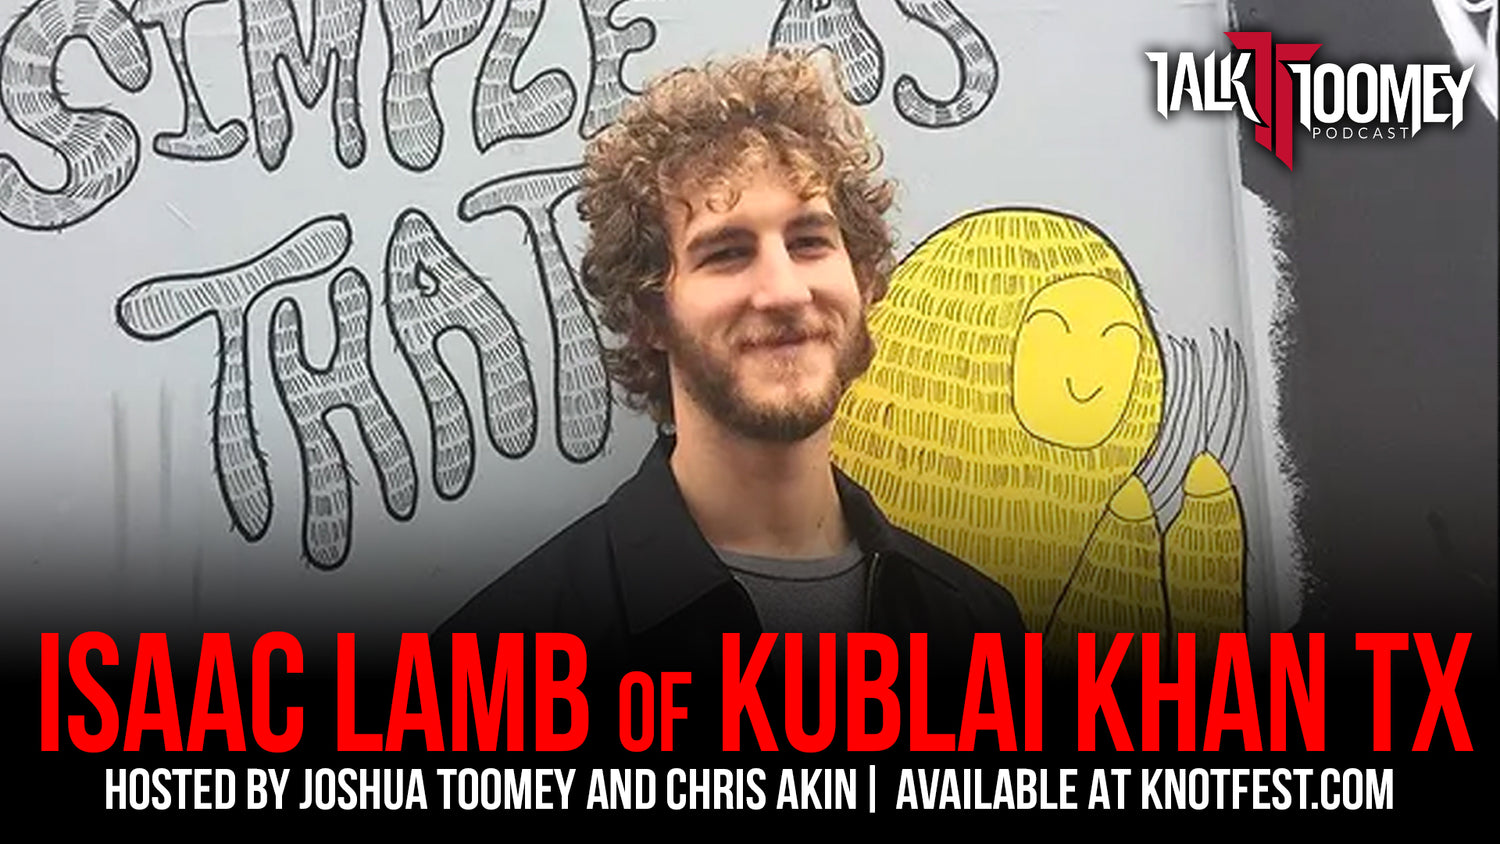 Isaac Lamb of Kublai Khan TX dissects the Lowest Form of Animal on the latest Talk Toomey Podcast